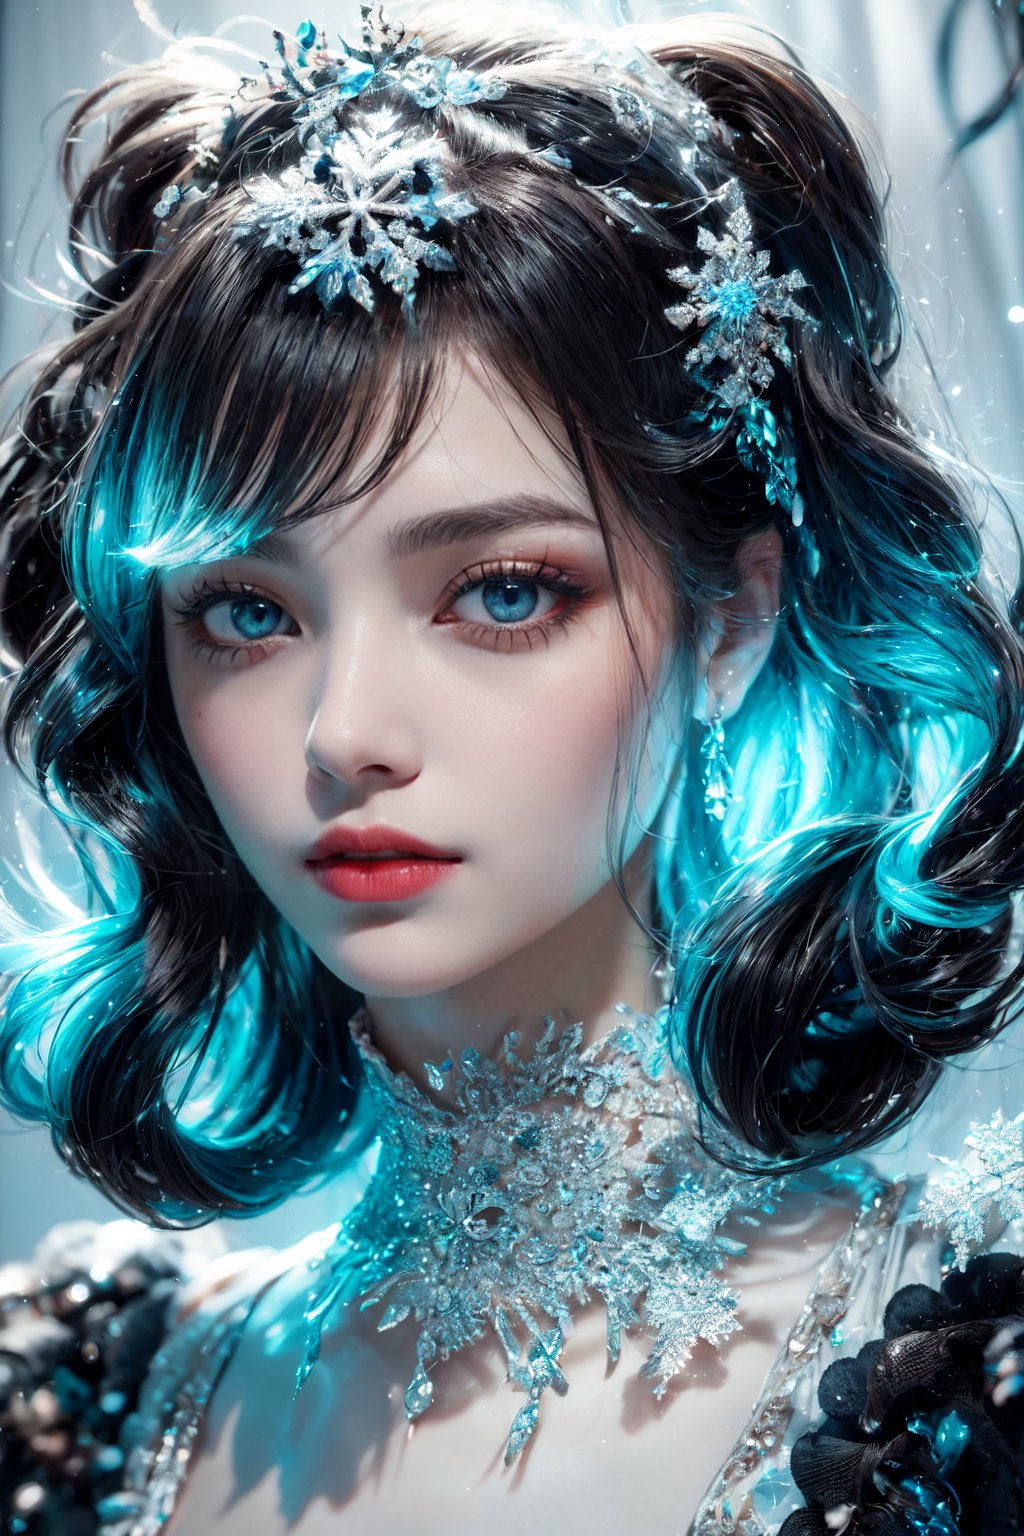 "(masterpiece, high quality:1.5), 8K, HDR, 
1girl, well_defined_face, well_defined_eyes, ultra_detailed_eyes, ultra_detailed_face, by FuturEvoLab, 
ethereal lighting, immortal, elegant, porcelain skin, jet-black hair, waves, pale face, ice-blue eyes, blood-red lips, pinhole photograph, retro aesthetic, monochromatic backdrop, mysterious, enigmatic, timeless allure, siren of the night, secrets, longing, hidden dangers, captivating, nostalgia, timeless fascination, ",Snowflake